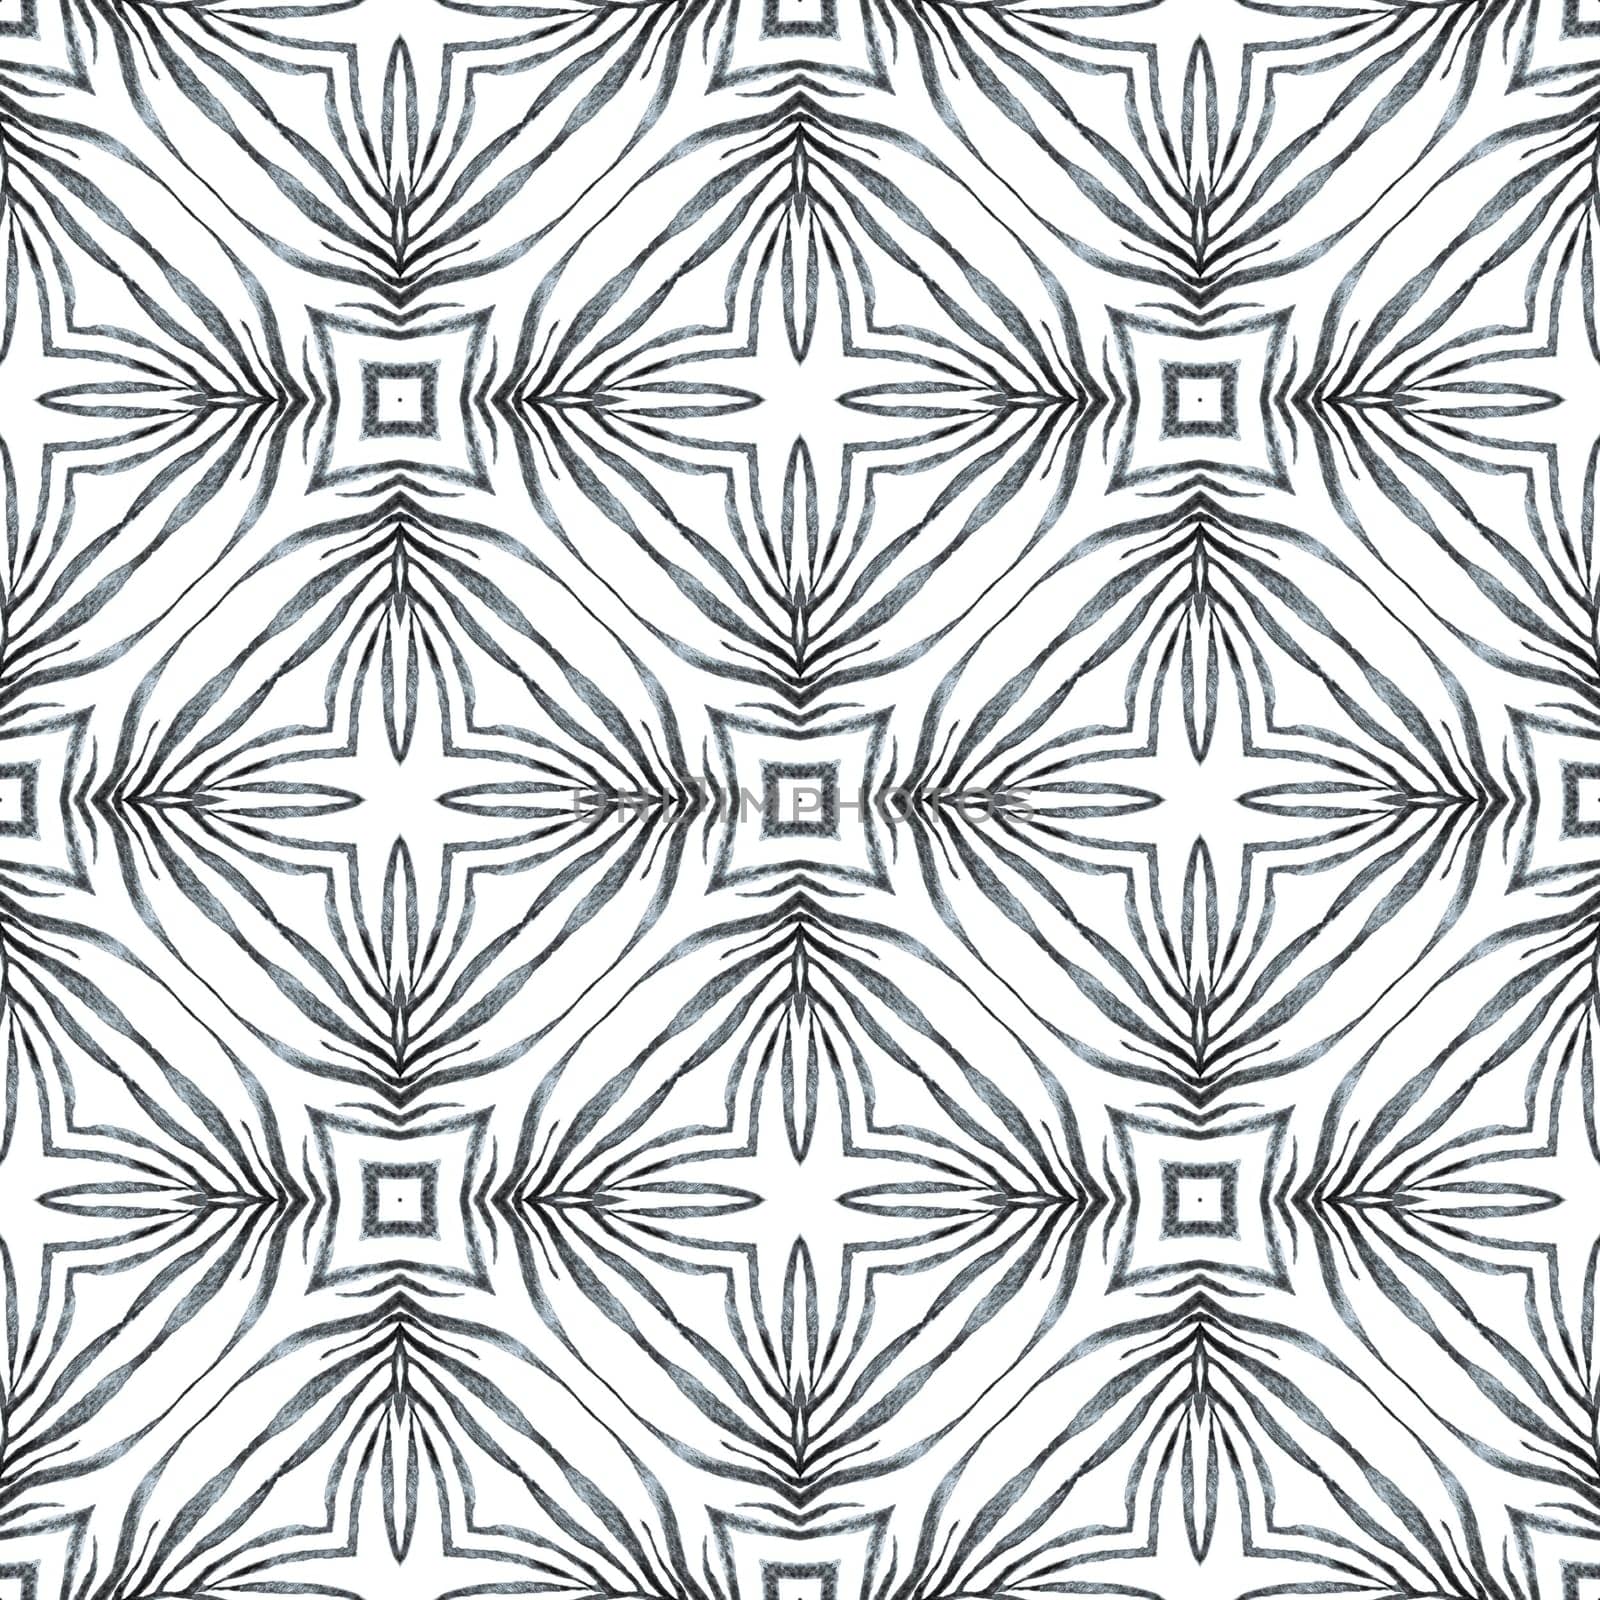 Chevron watercolor pattern. Black and white by beginagain